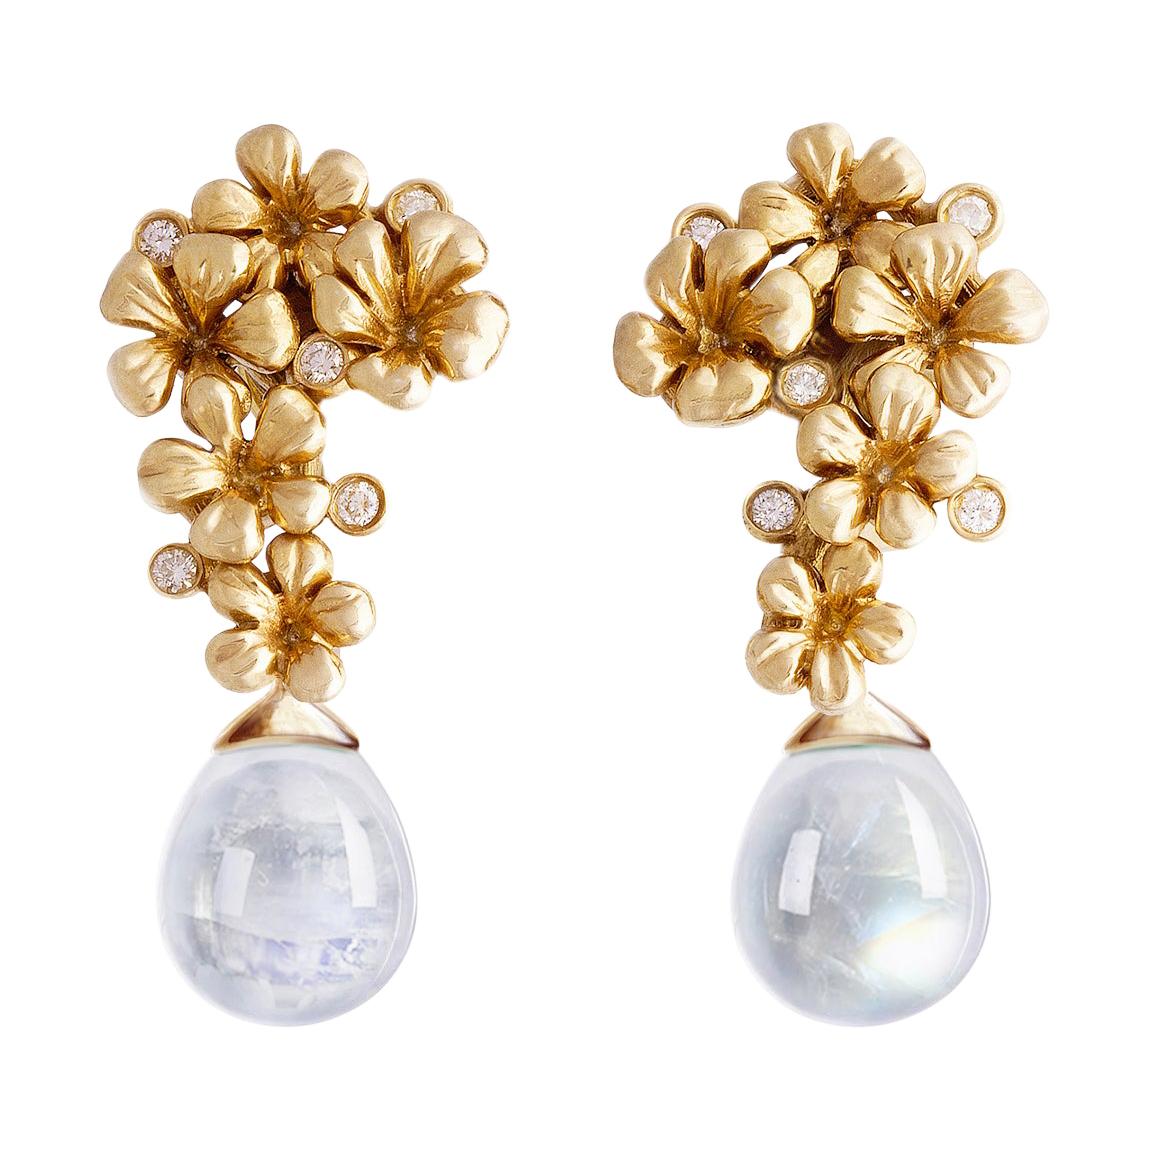 18 Karat Yellow Gold Contemporary Earrings with Diamonds and Quartzes